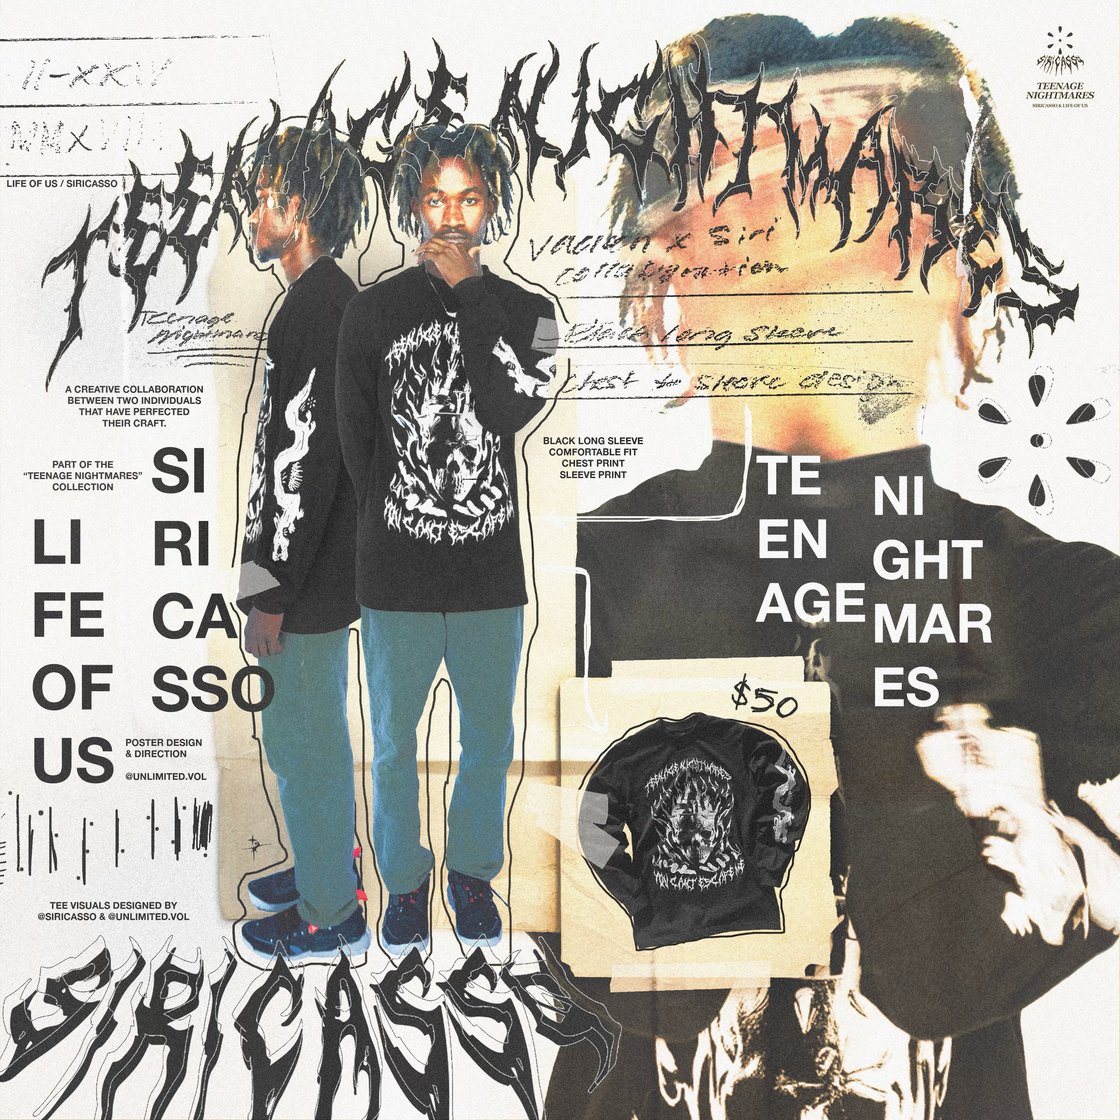 Image of Teenage Nightmares collab with Life of Us clothing 